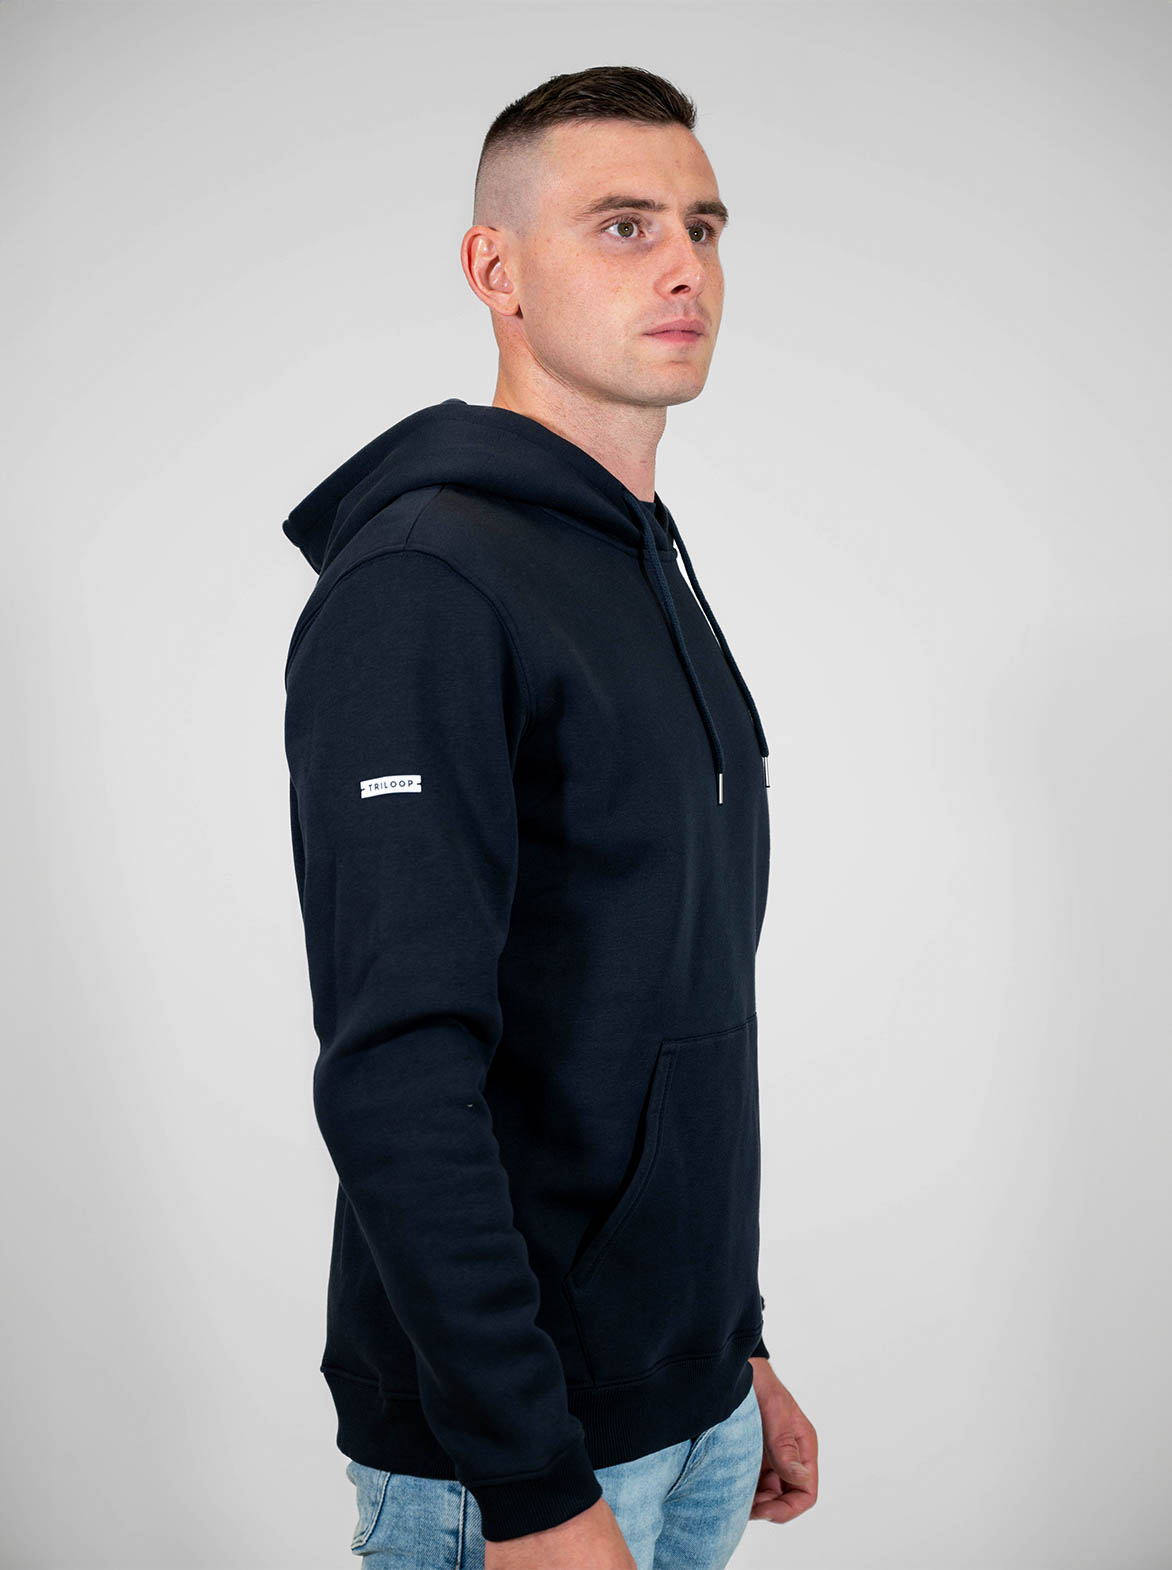 Men's Cotton Hoodie Made in France and Organic